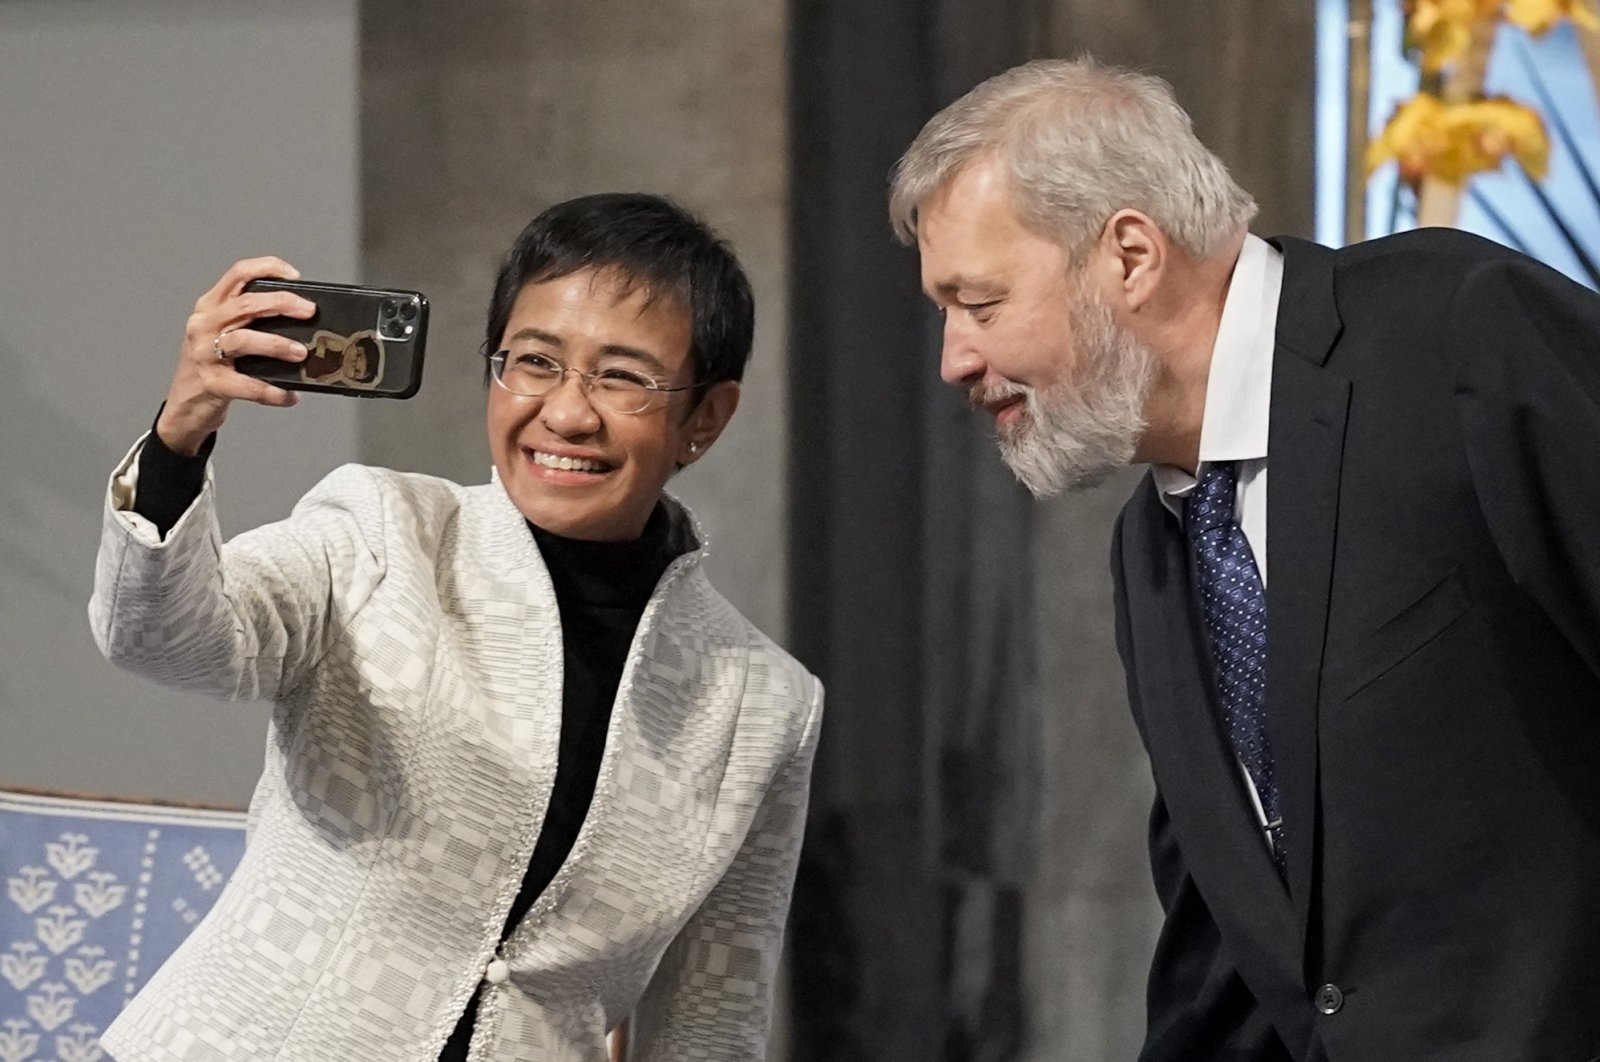 Nobel Peace Prize laureates Maria Ressa of the Philippines and Dmitry Muratov of Russia make a selfie during the gala award ceremony for the Nobel Peace prize, in Oslo, Norway, on Dec. 10, 2021.  (AFP Photo)